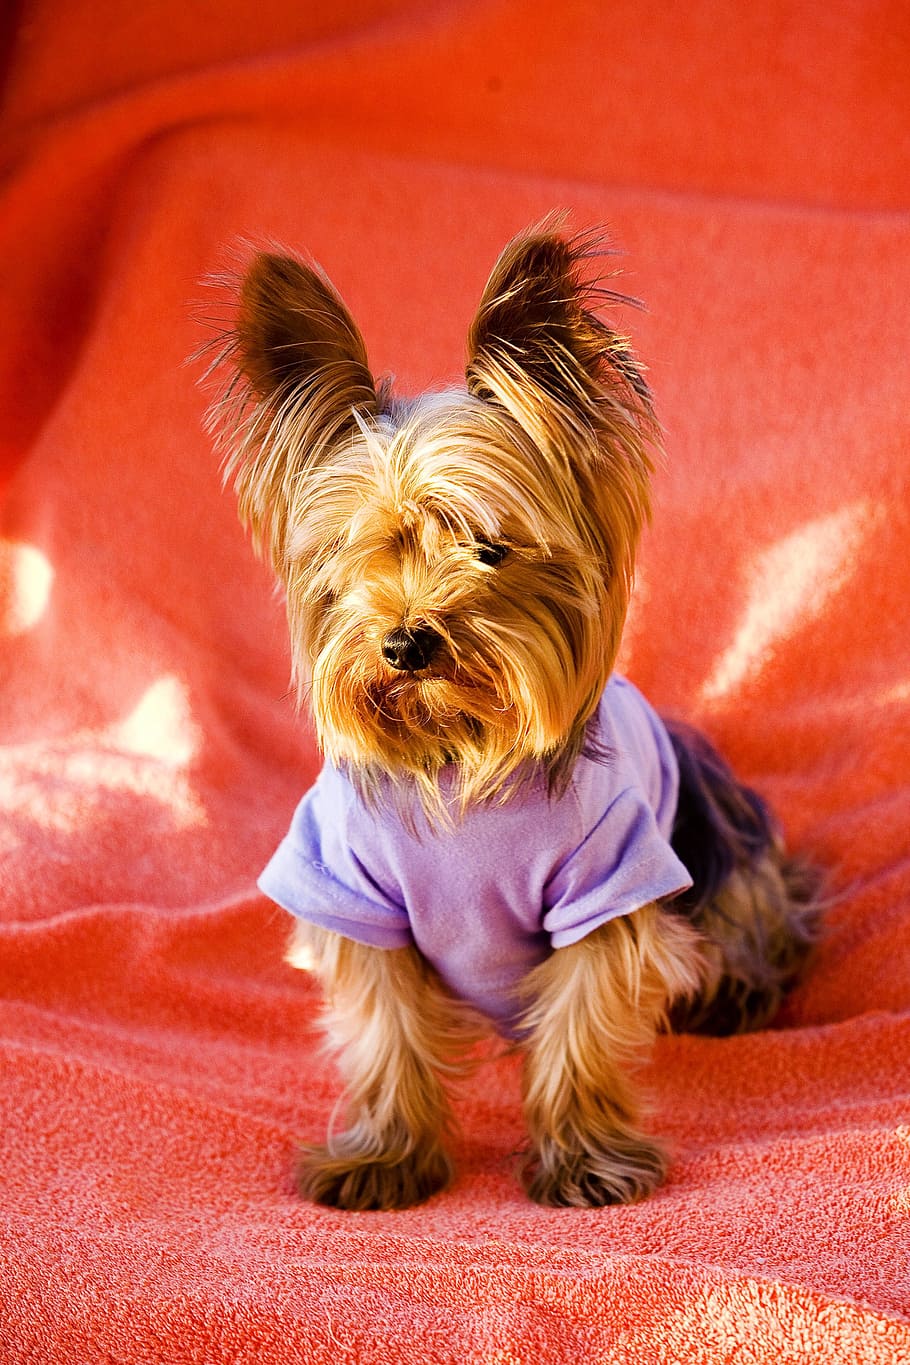 dog, pet, pets, yorkshire Terrier, animal, terrier, cute, puppy, small, purebred Dog